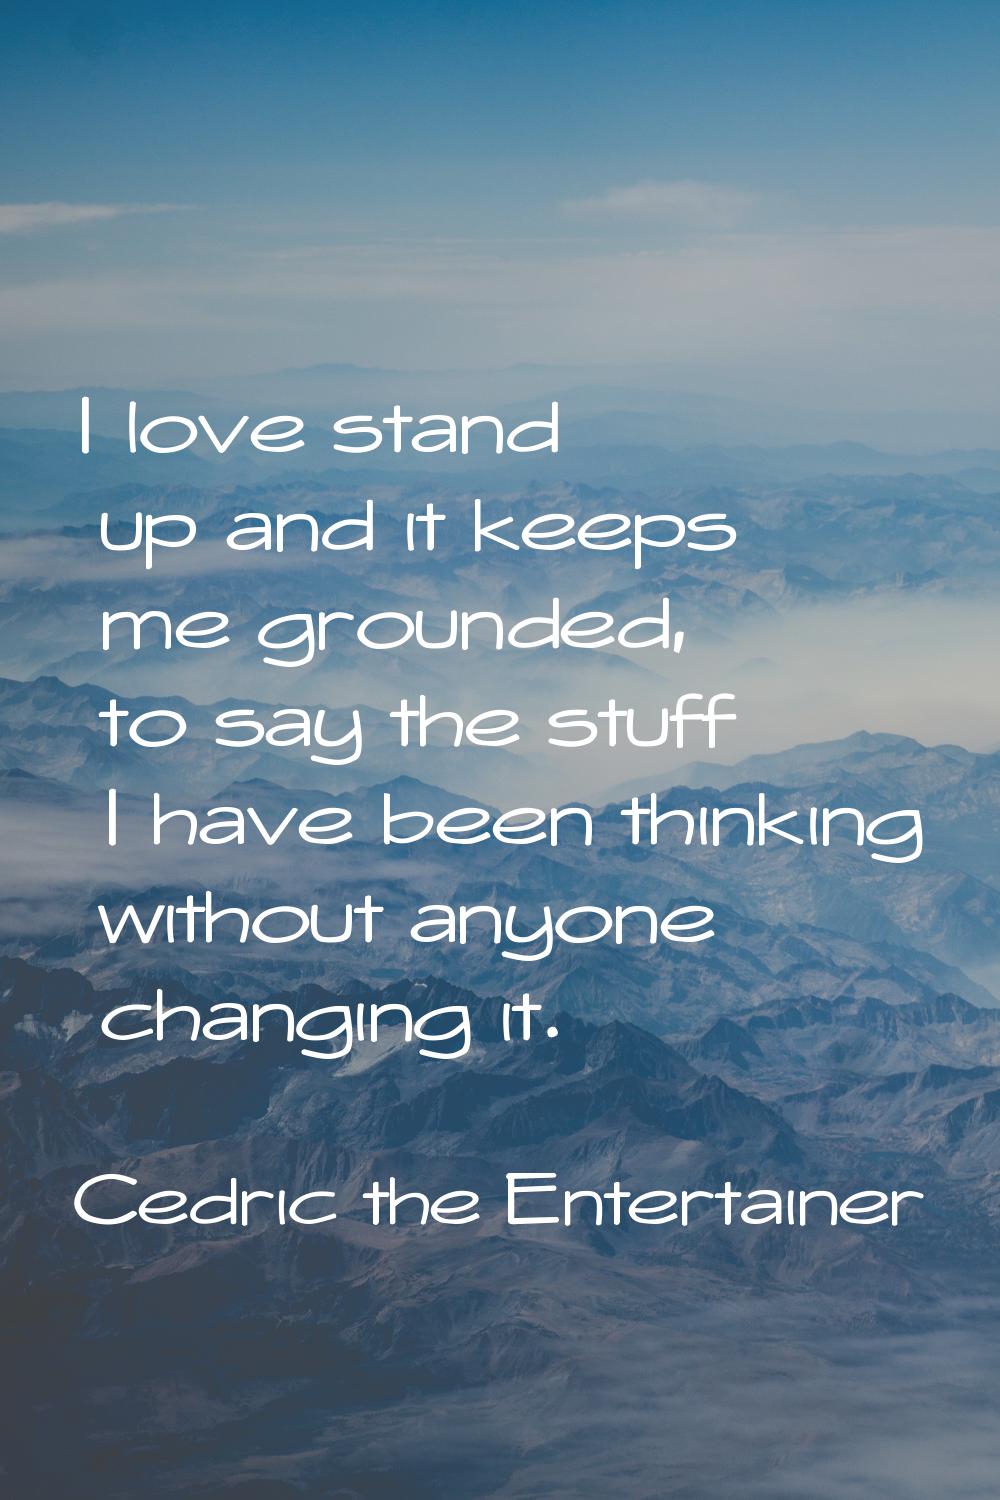 I love stand up and it keeps me grounded, to say the stuff I have been thinking without anyone chan